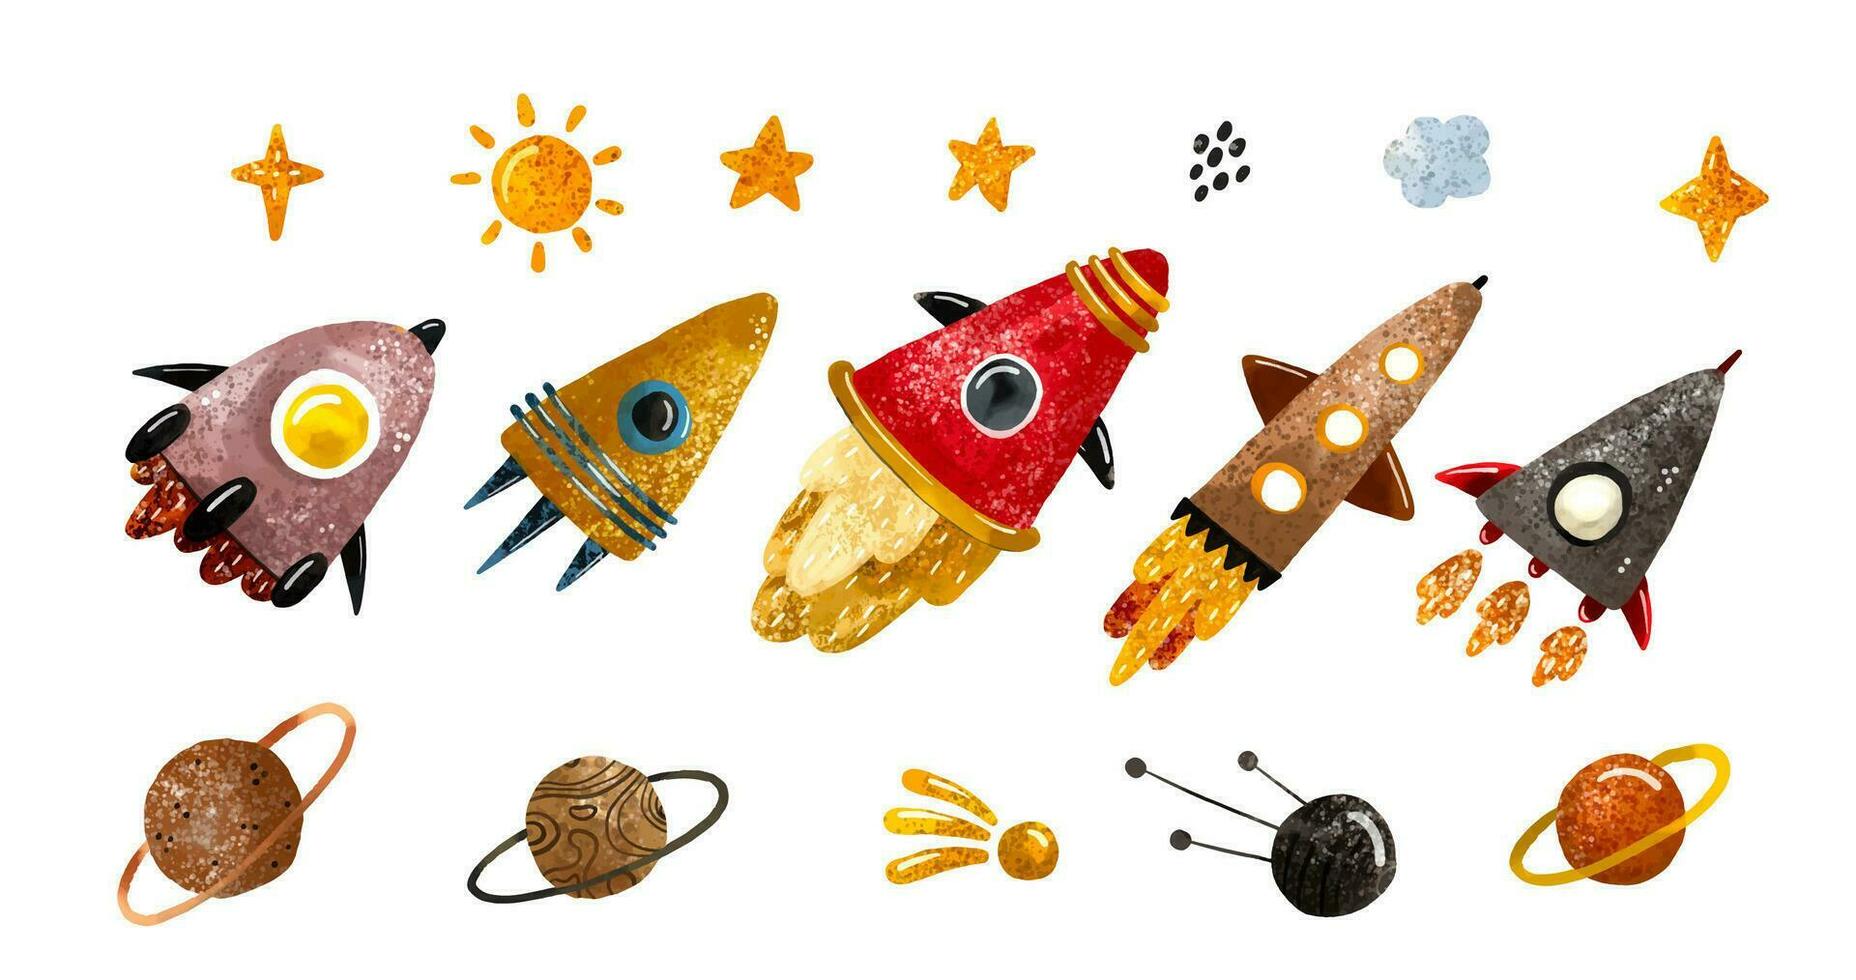 Space illustration in childish style. Set of cosmos elements such as rocket, stars, asteroids, ufo, Comets, moon, osteroid, stylized planets set. Cosmic set vector